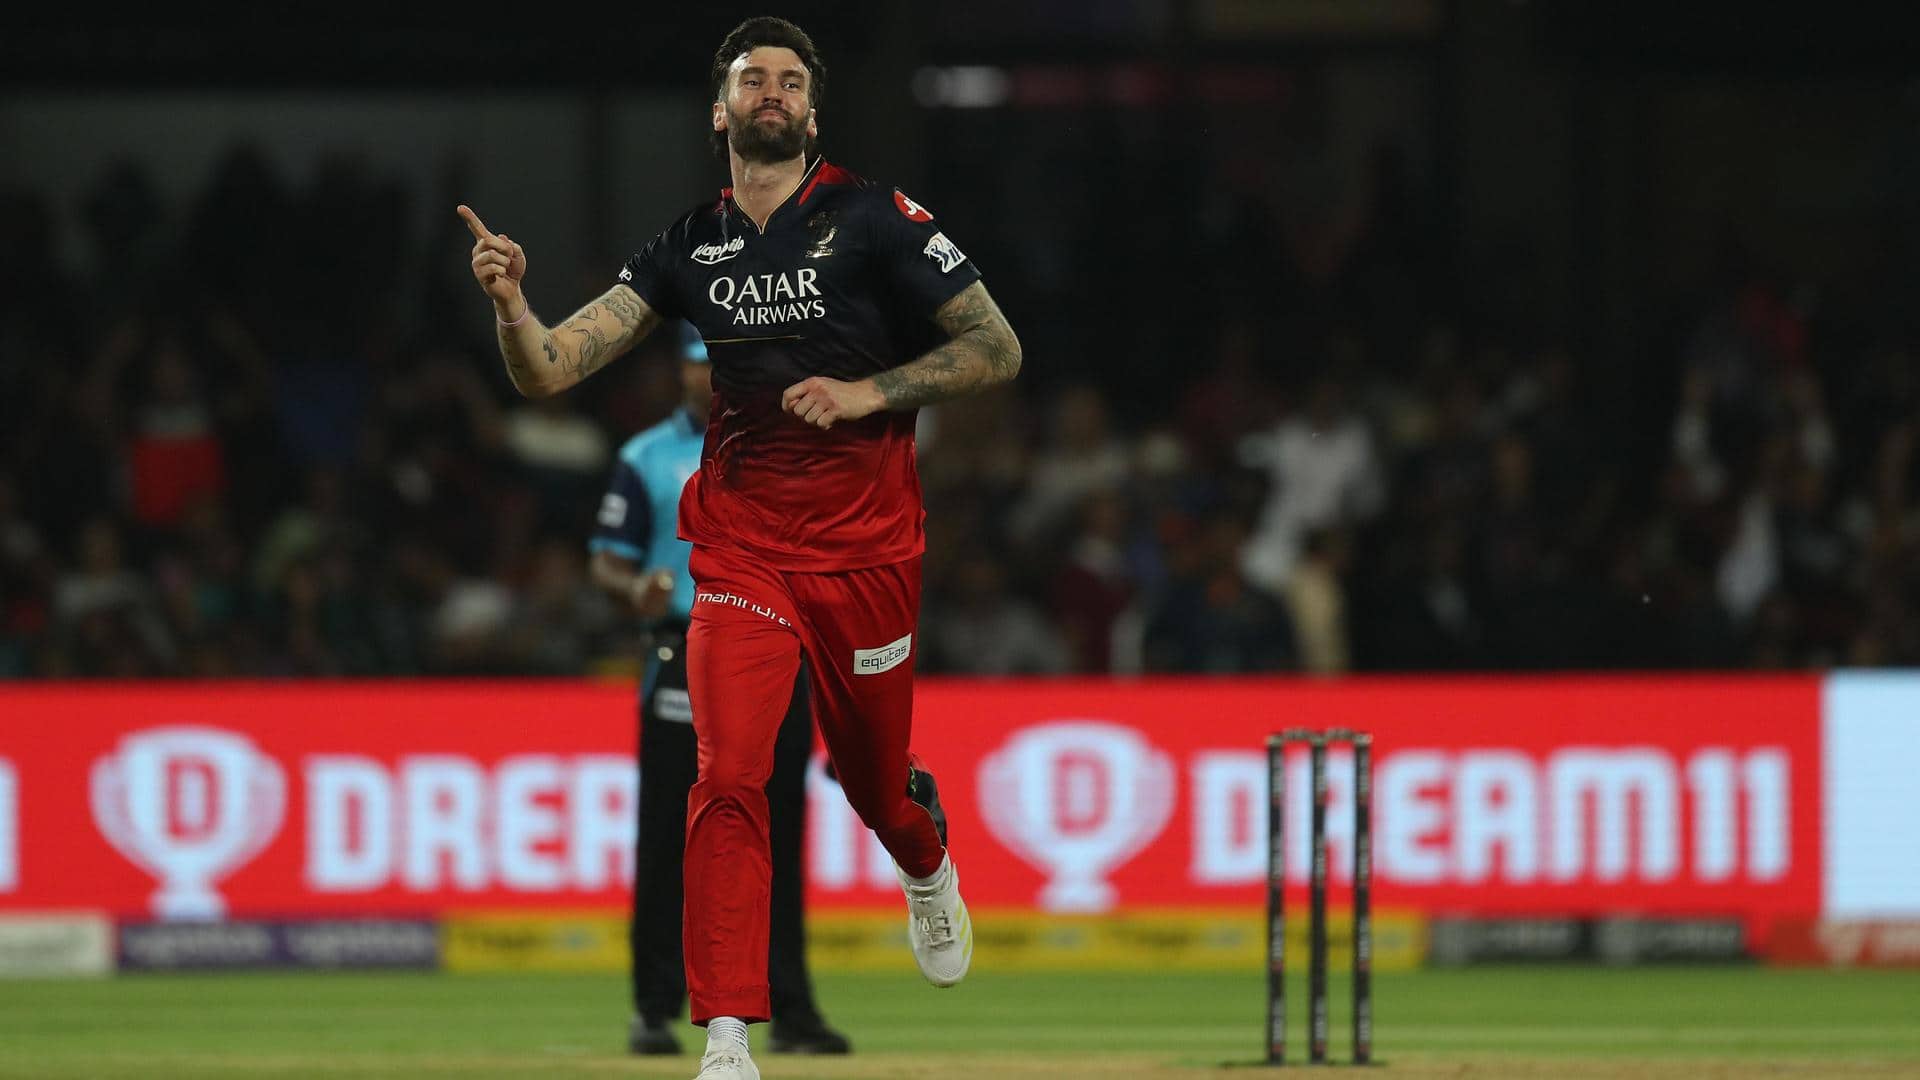 Reece Topley ruled out of IPL 2023: Details here